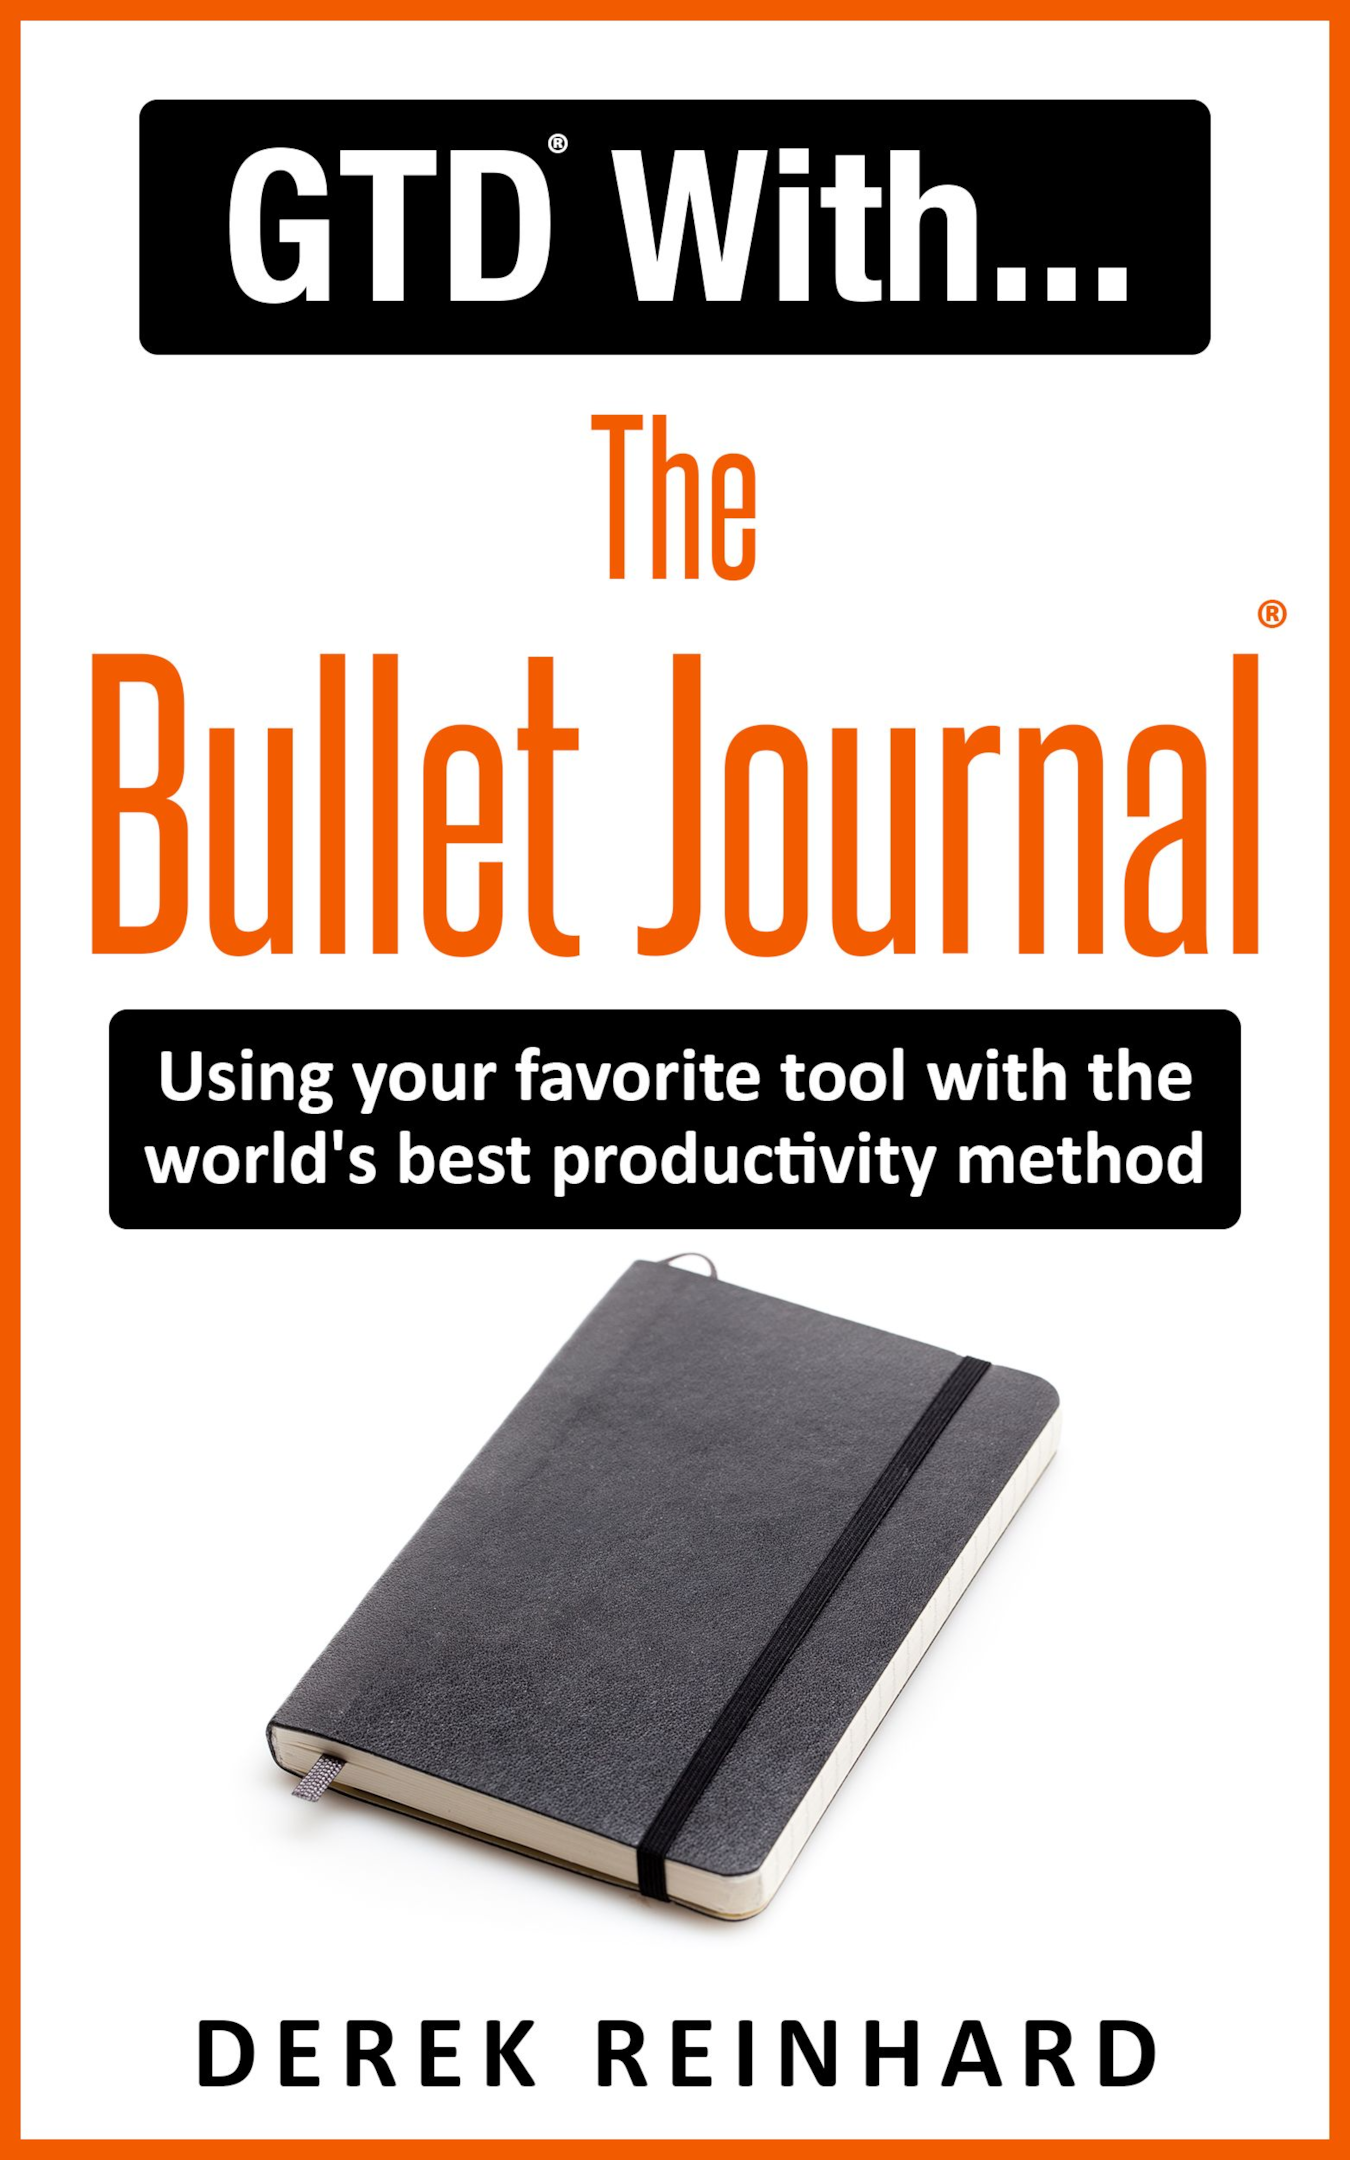 Image of the book cover for "GTD With The Bullet Journal" by Derek Reinhard